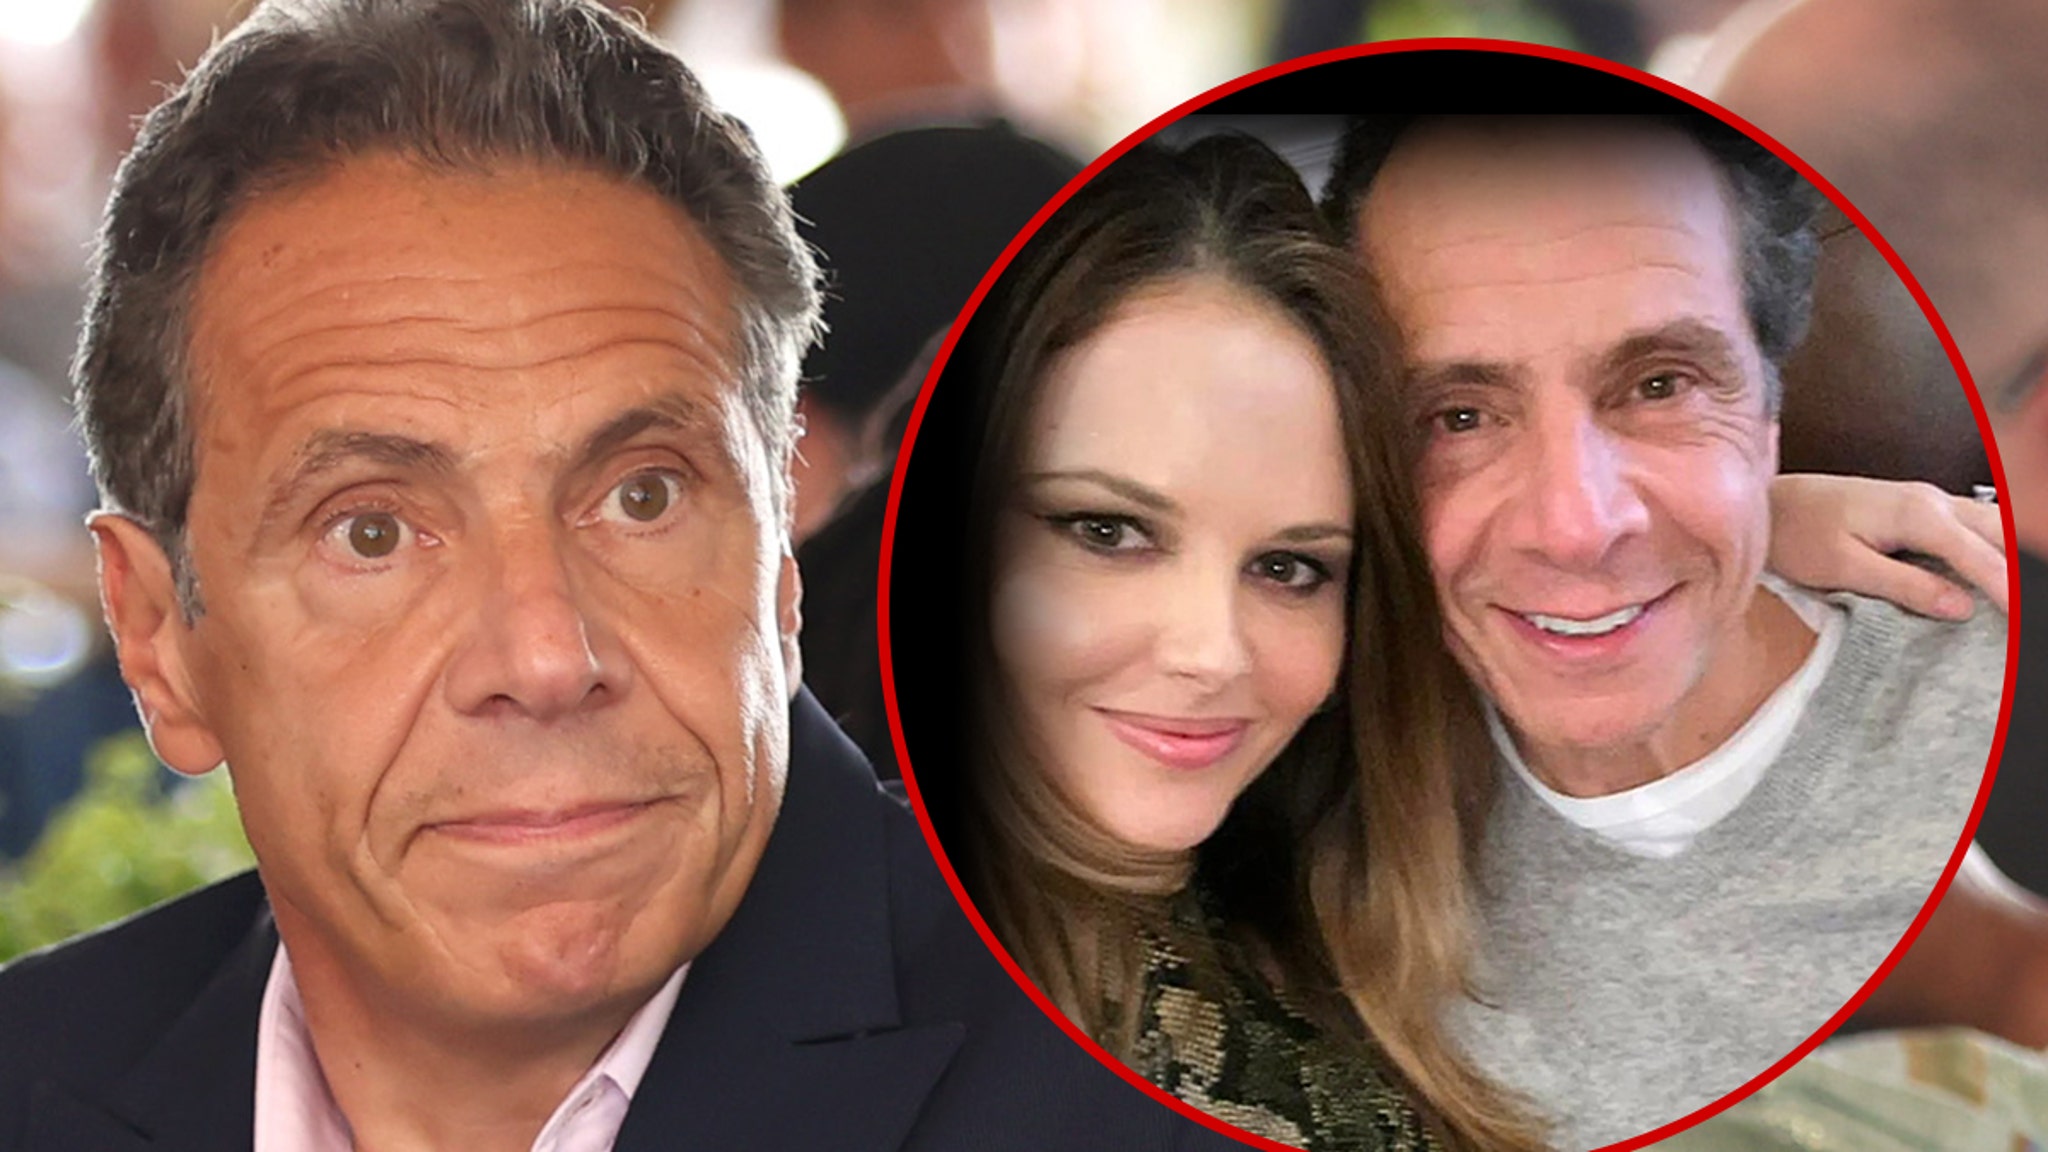 Ex-NY Governor Andrew Cuomo Sued For Sexual Harassment by Former Assistant